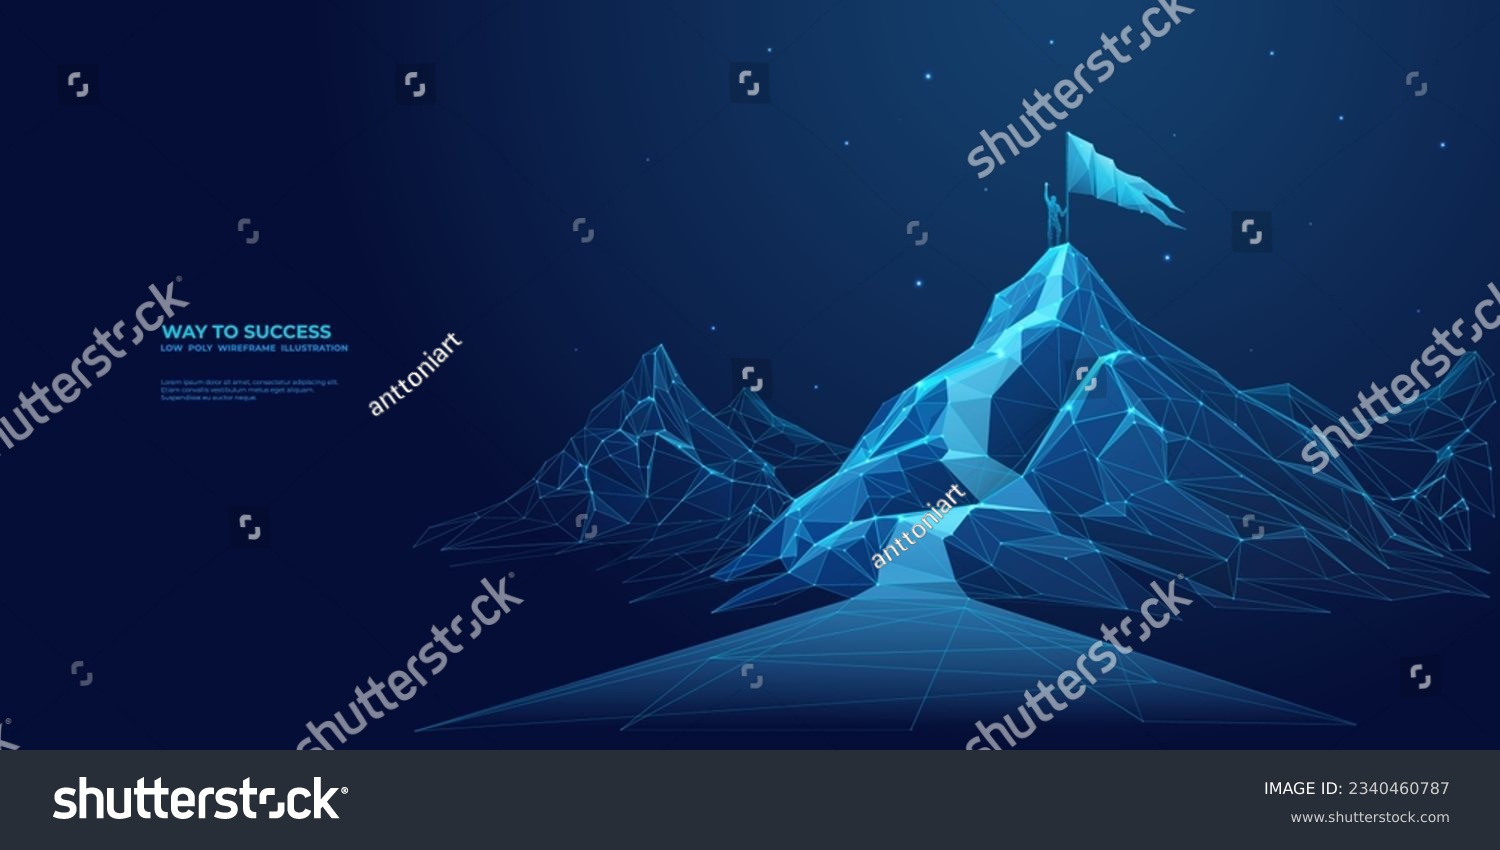 SVG of Digital mountain with a flag and a professional climbing businessman on the top. Abstract goals achievement and ambitions concept. Technology dark blue background with peaks and constellations. svg